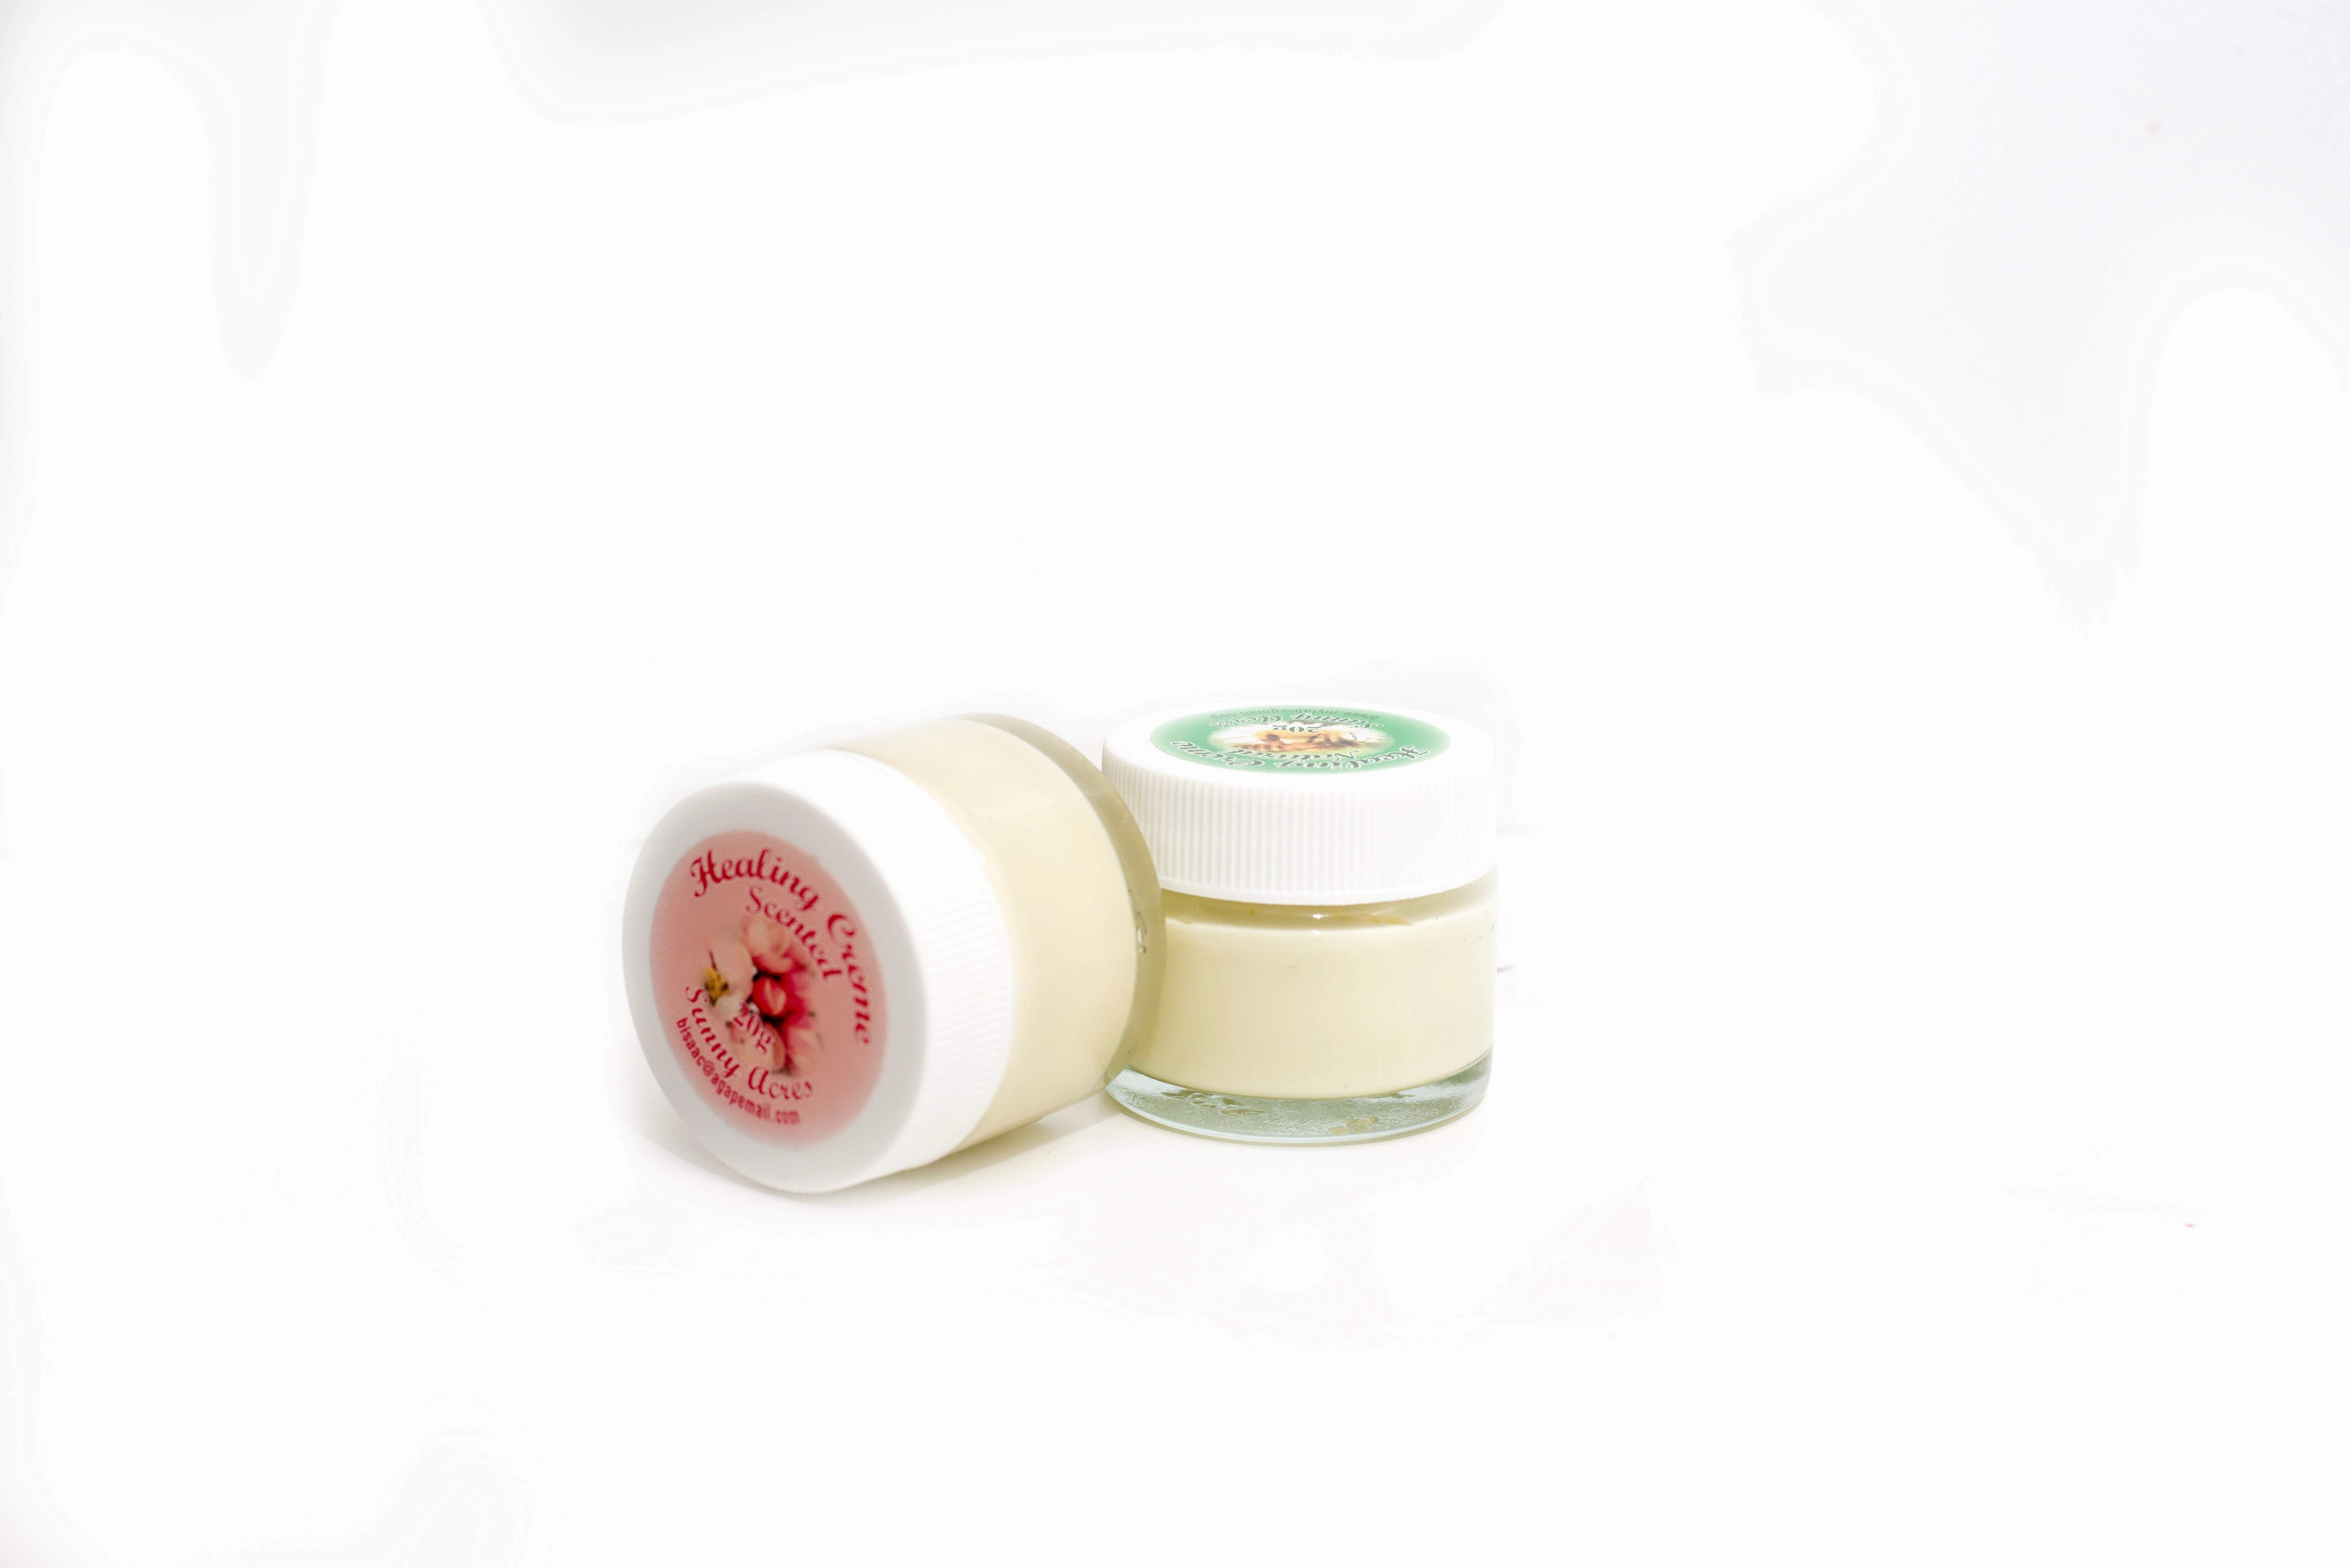 A skin-softening and moisturizing salve made with beeswax and other natural ingredients. Its uses in